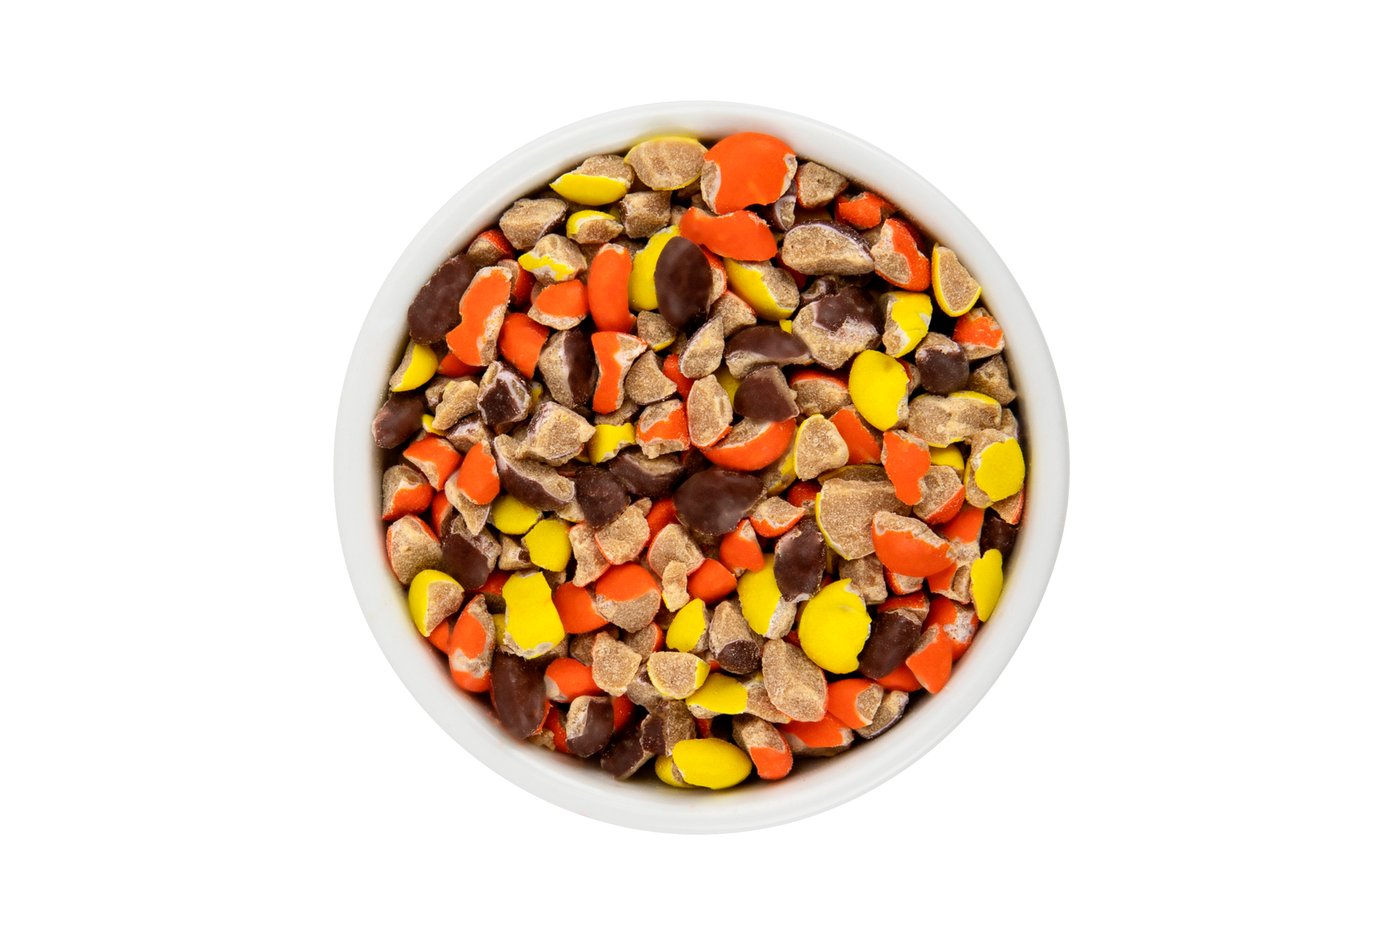 Chopped Reese's Pieces photo